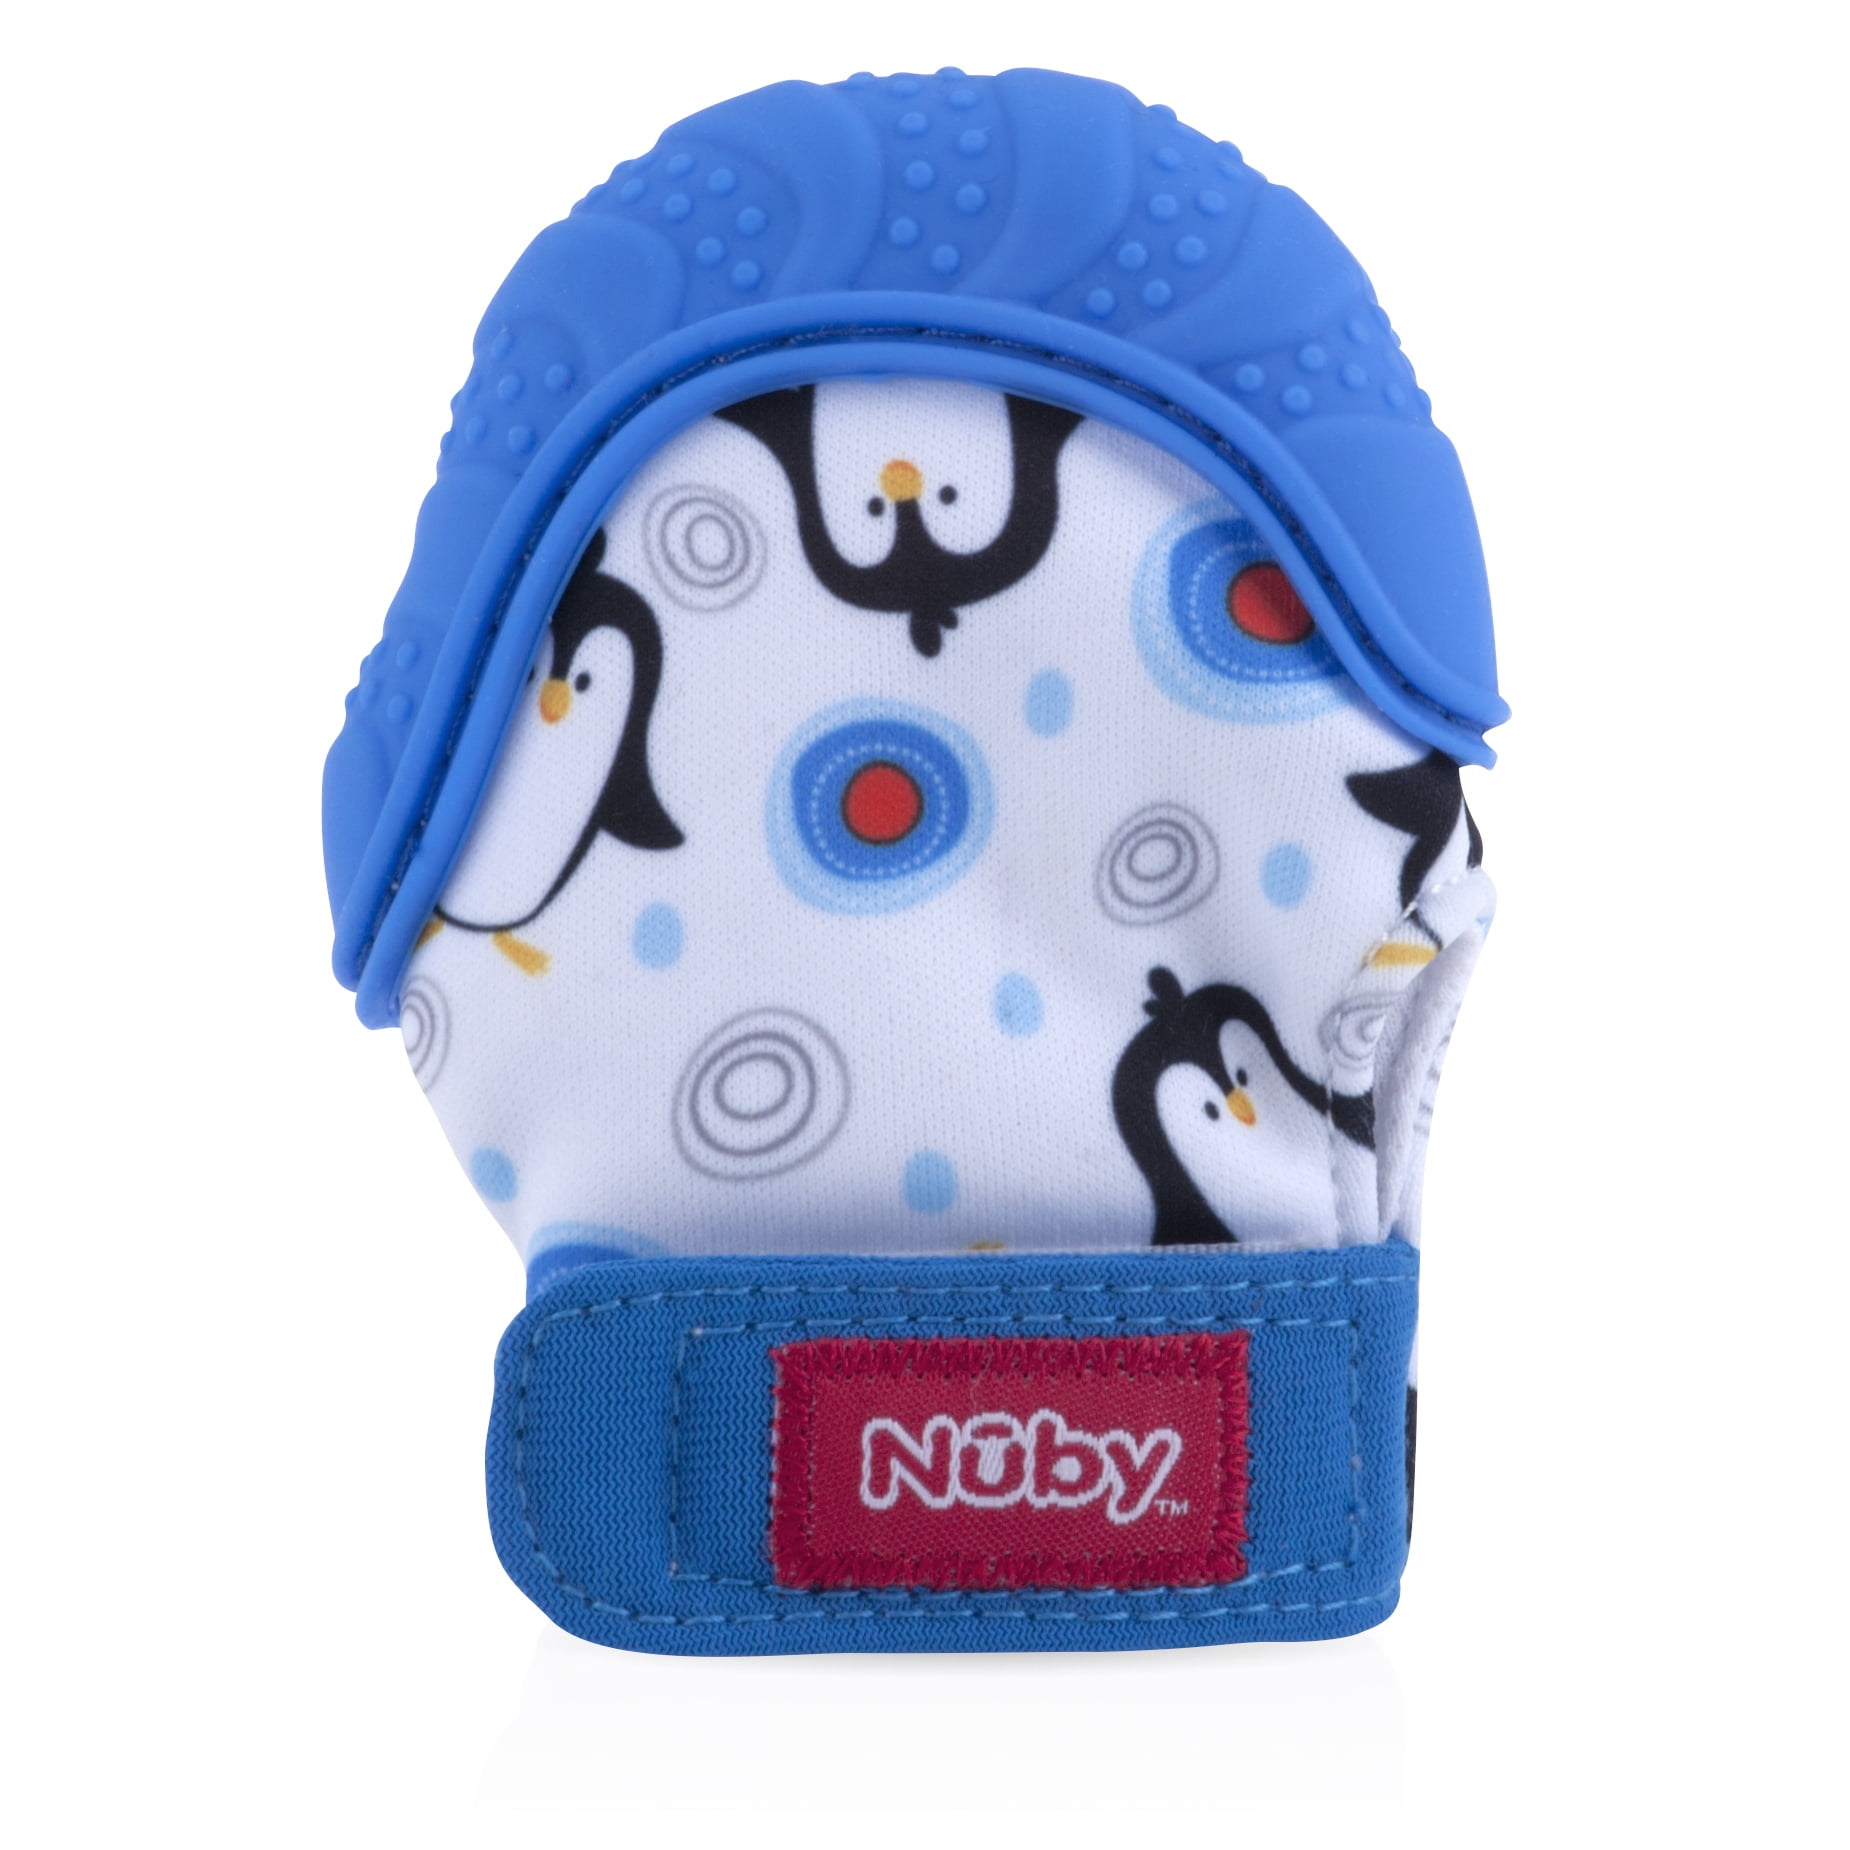 Nuby Teething Mitten with Hygienic Travel Bag, Styles May Vary, 1 Pack -  Walmart.com